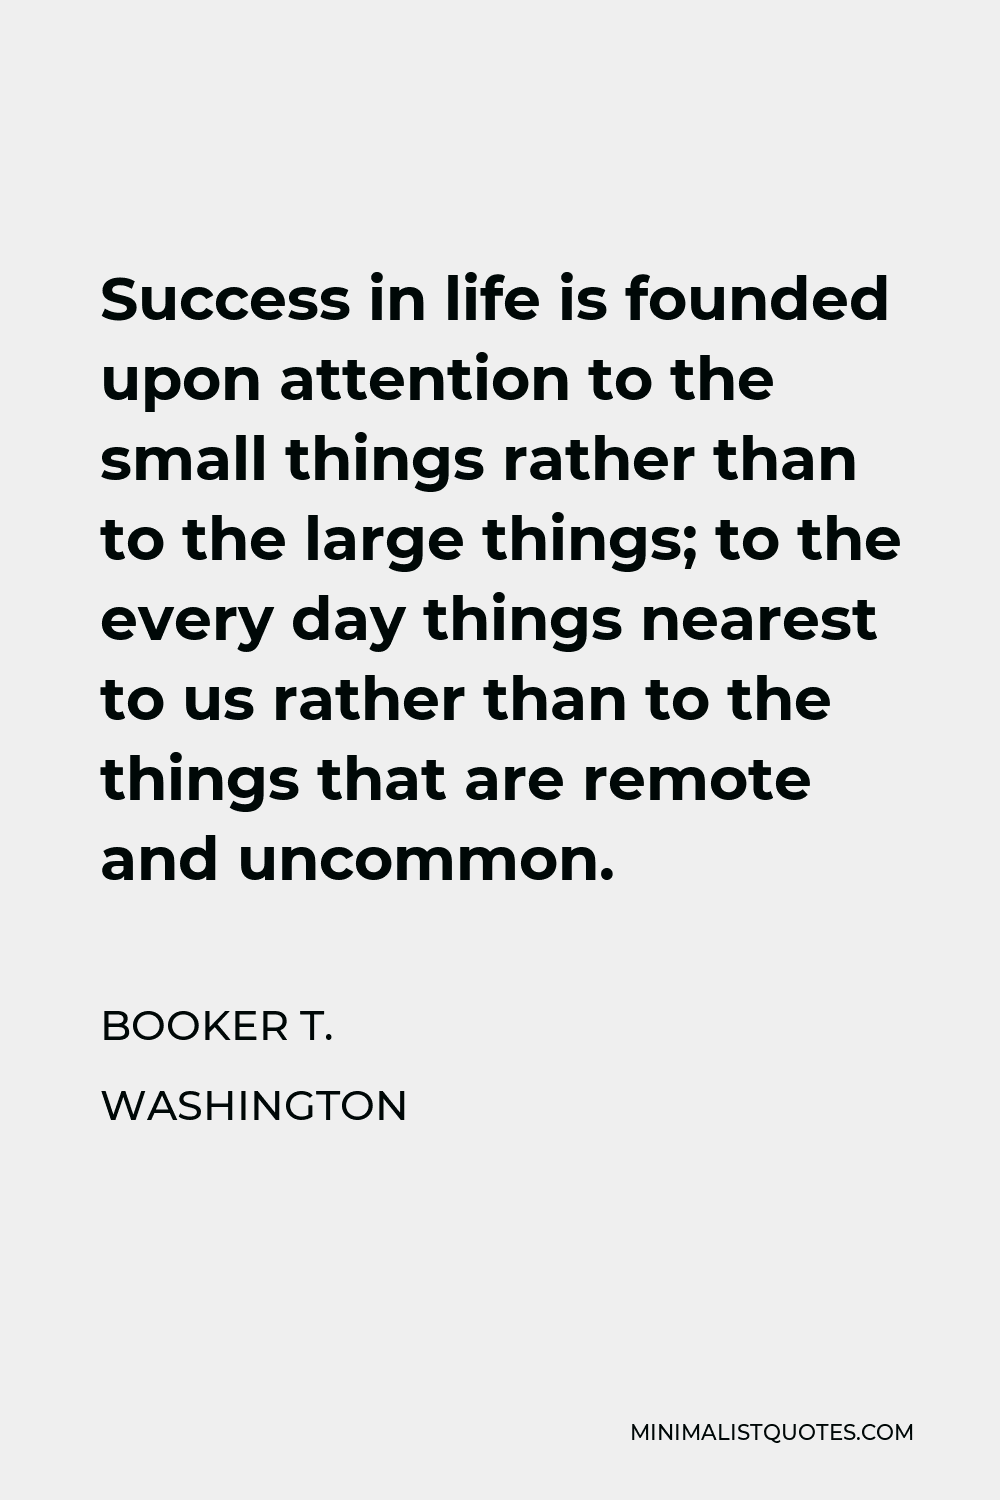 Booker T. Washington Quote - Success in life is founded upon attention to the small things rather than to the large things; to the every day things nearest to us rather than to the things that are remote and uncommon.